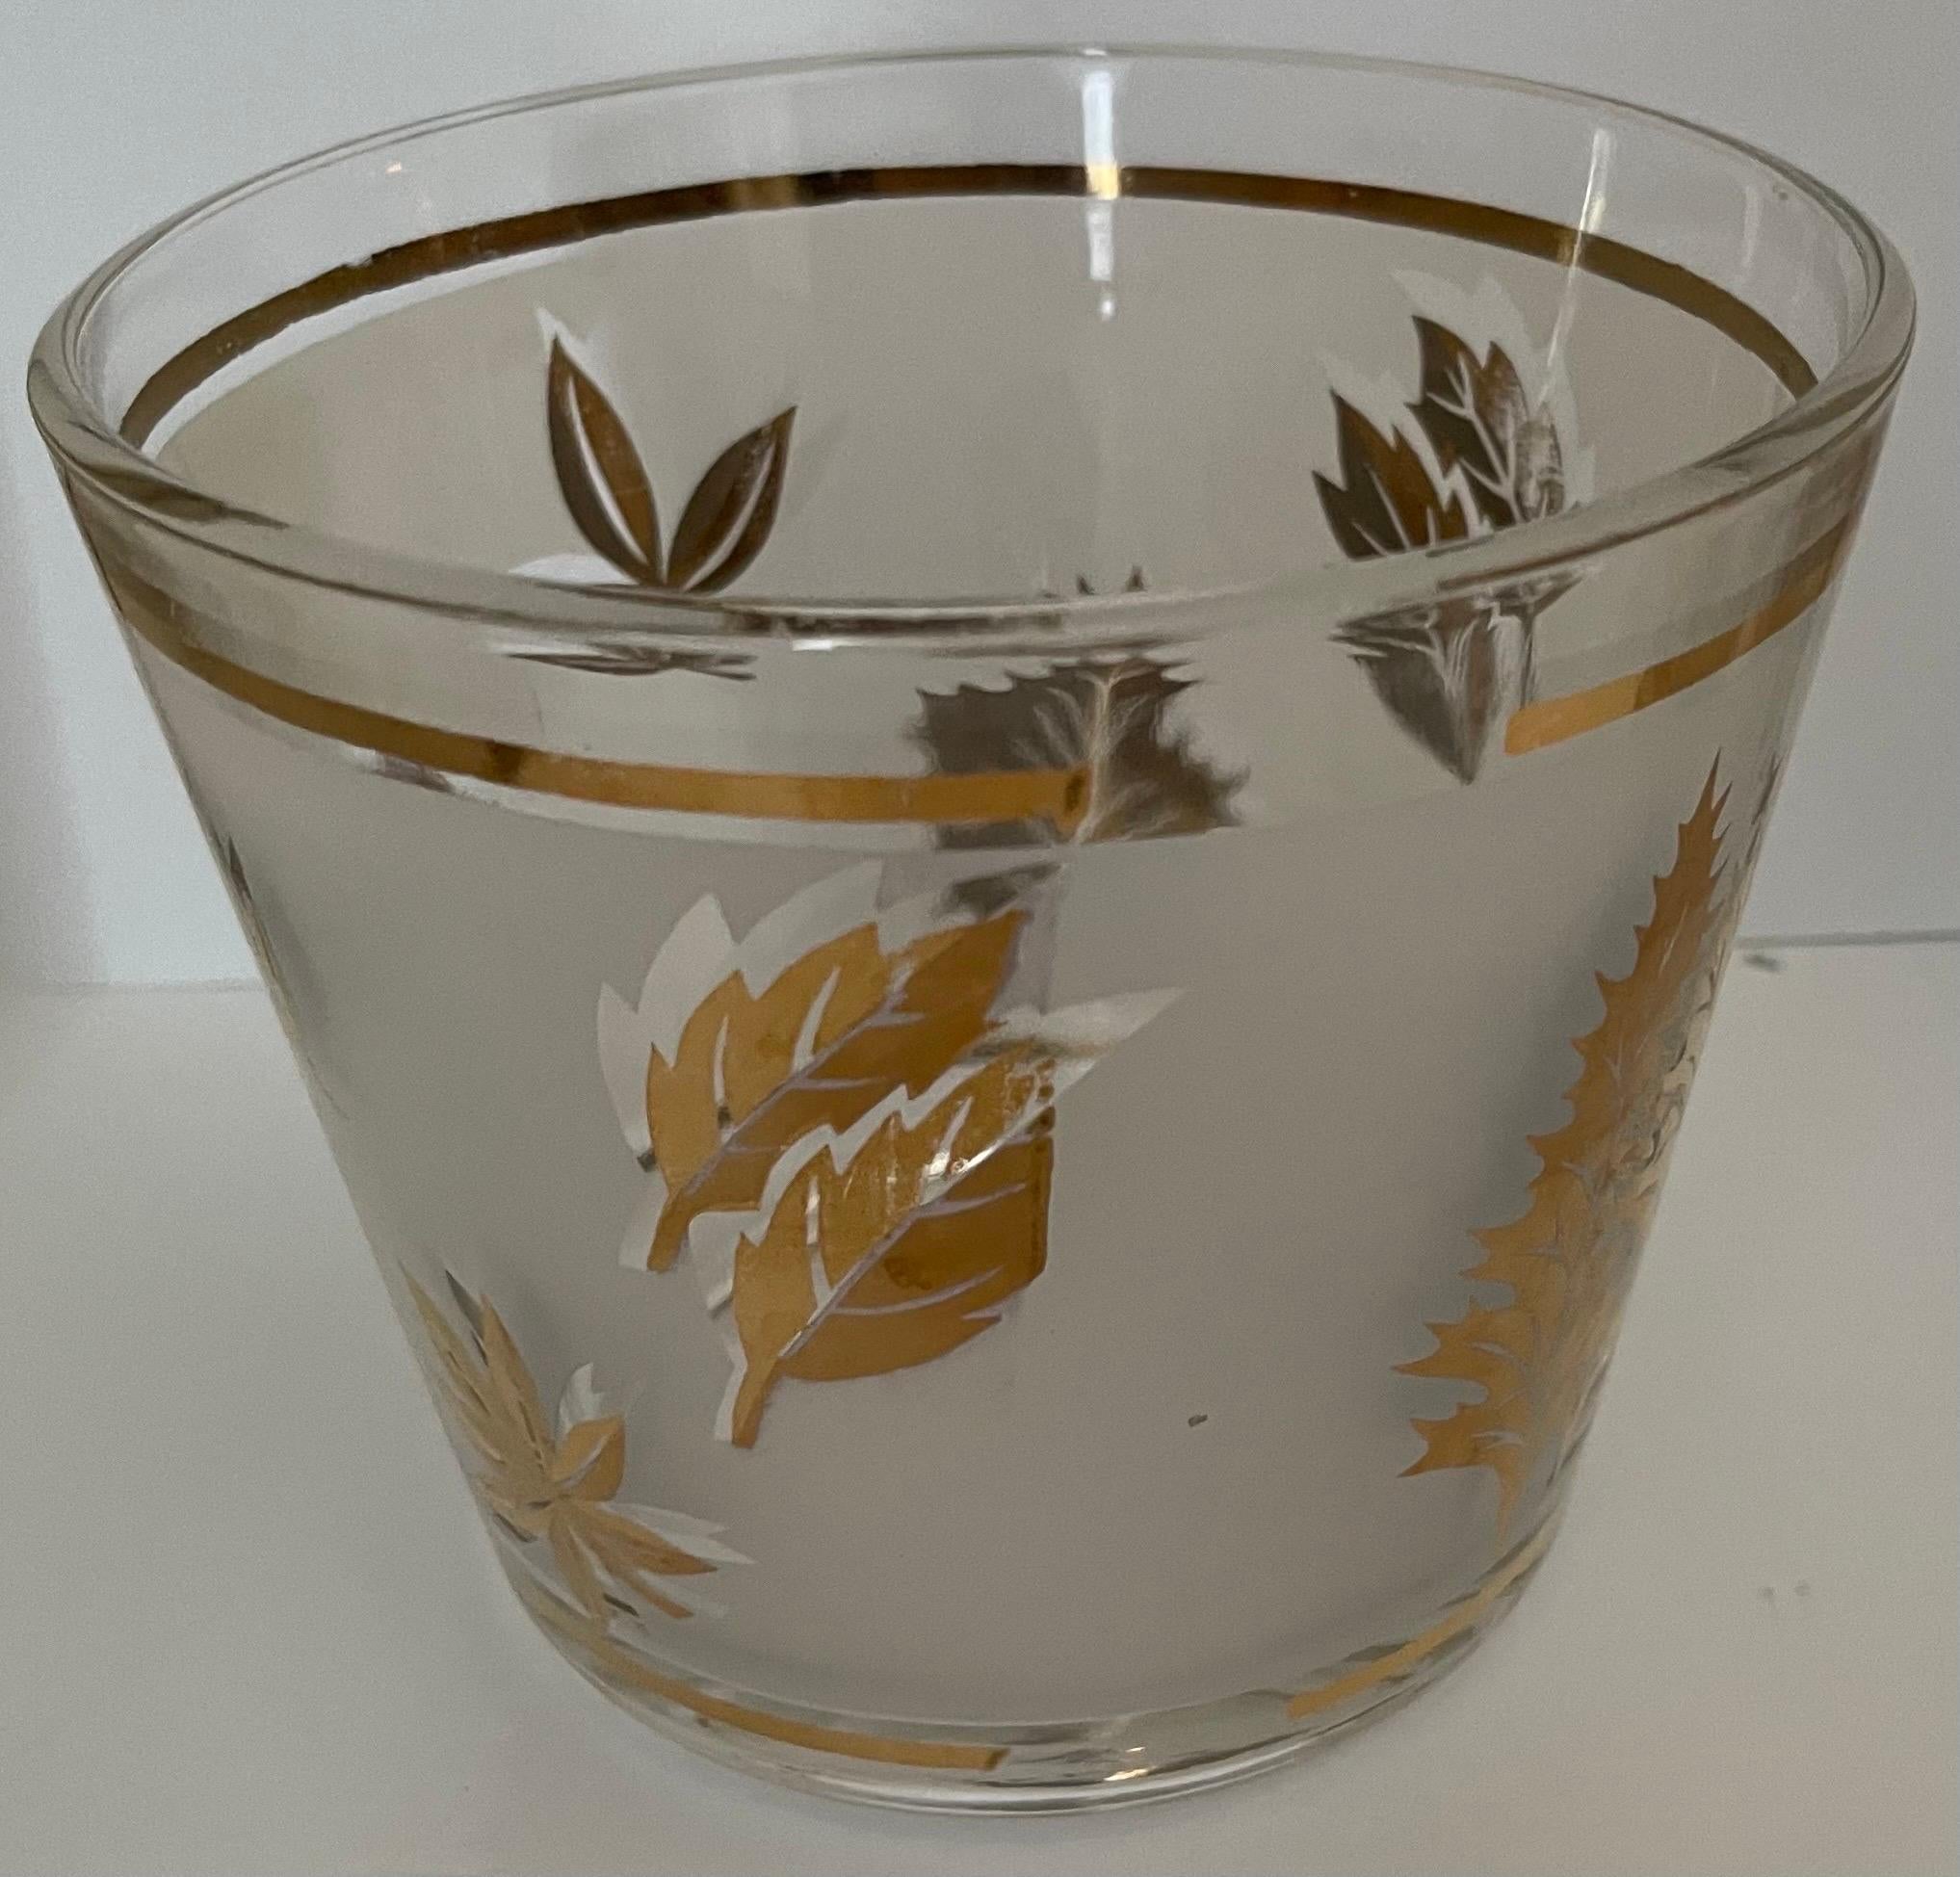 American Golden Foliage Leaf Highball Glasses Set of 8 and Ice Bucket by Libby Glass